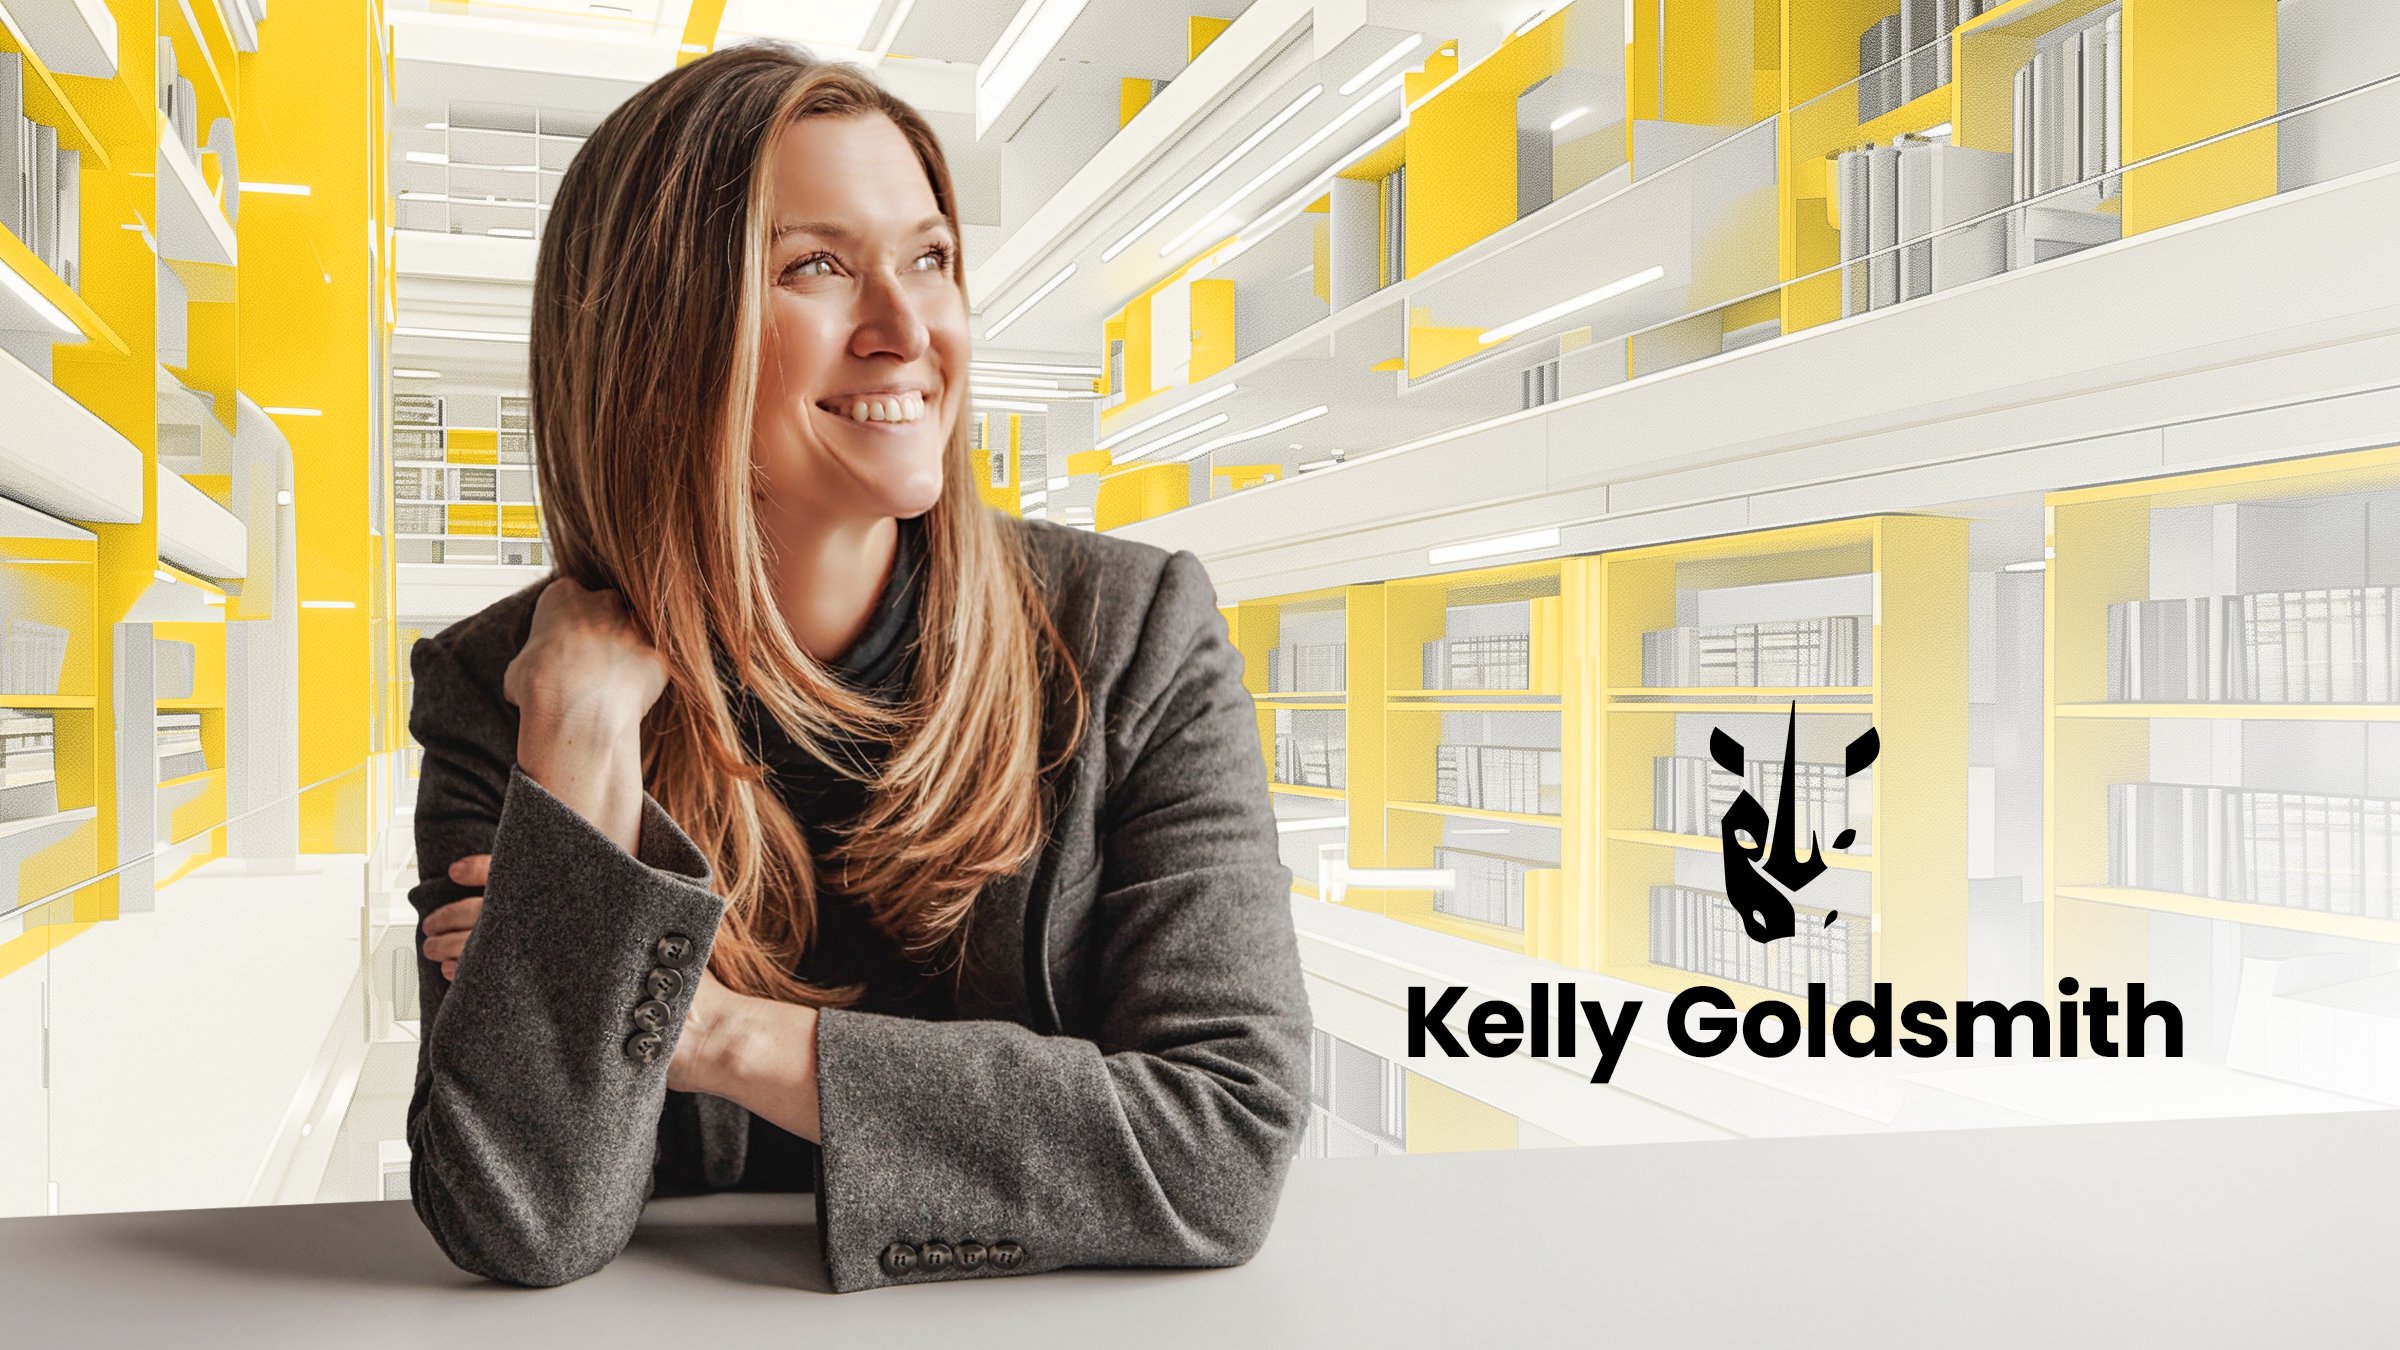 Renowned Marketing Scholar Kelly Goldsmith Joins Breakout Learning’s Academic Advisory Board